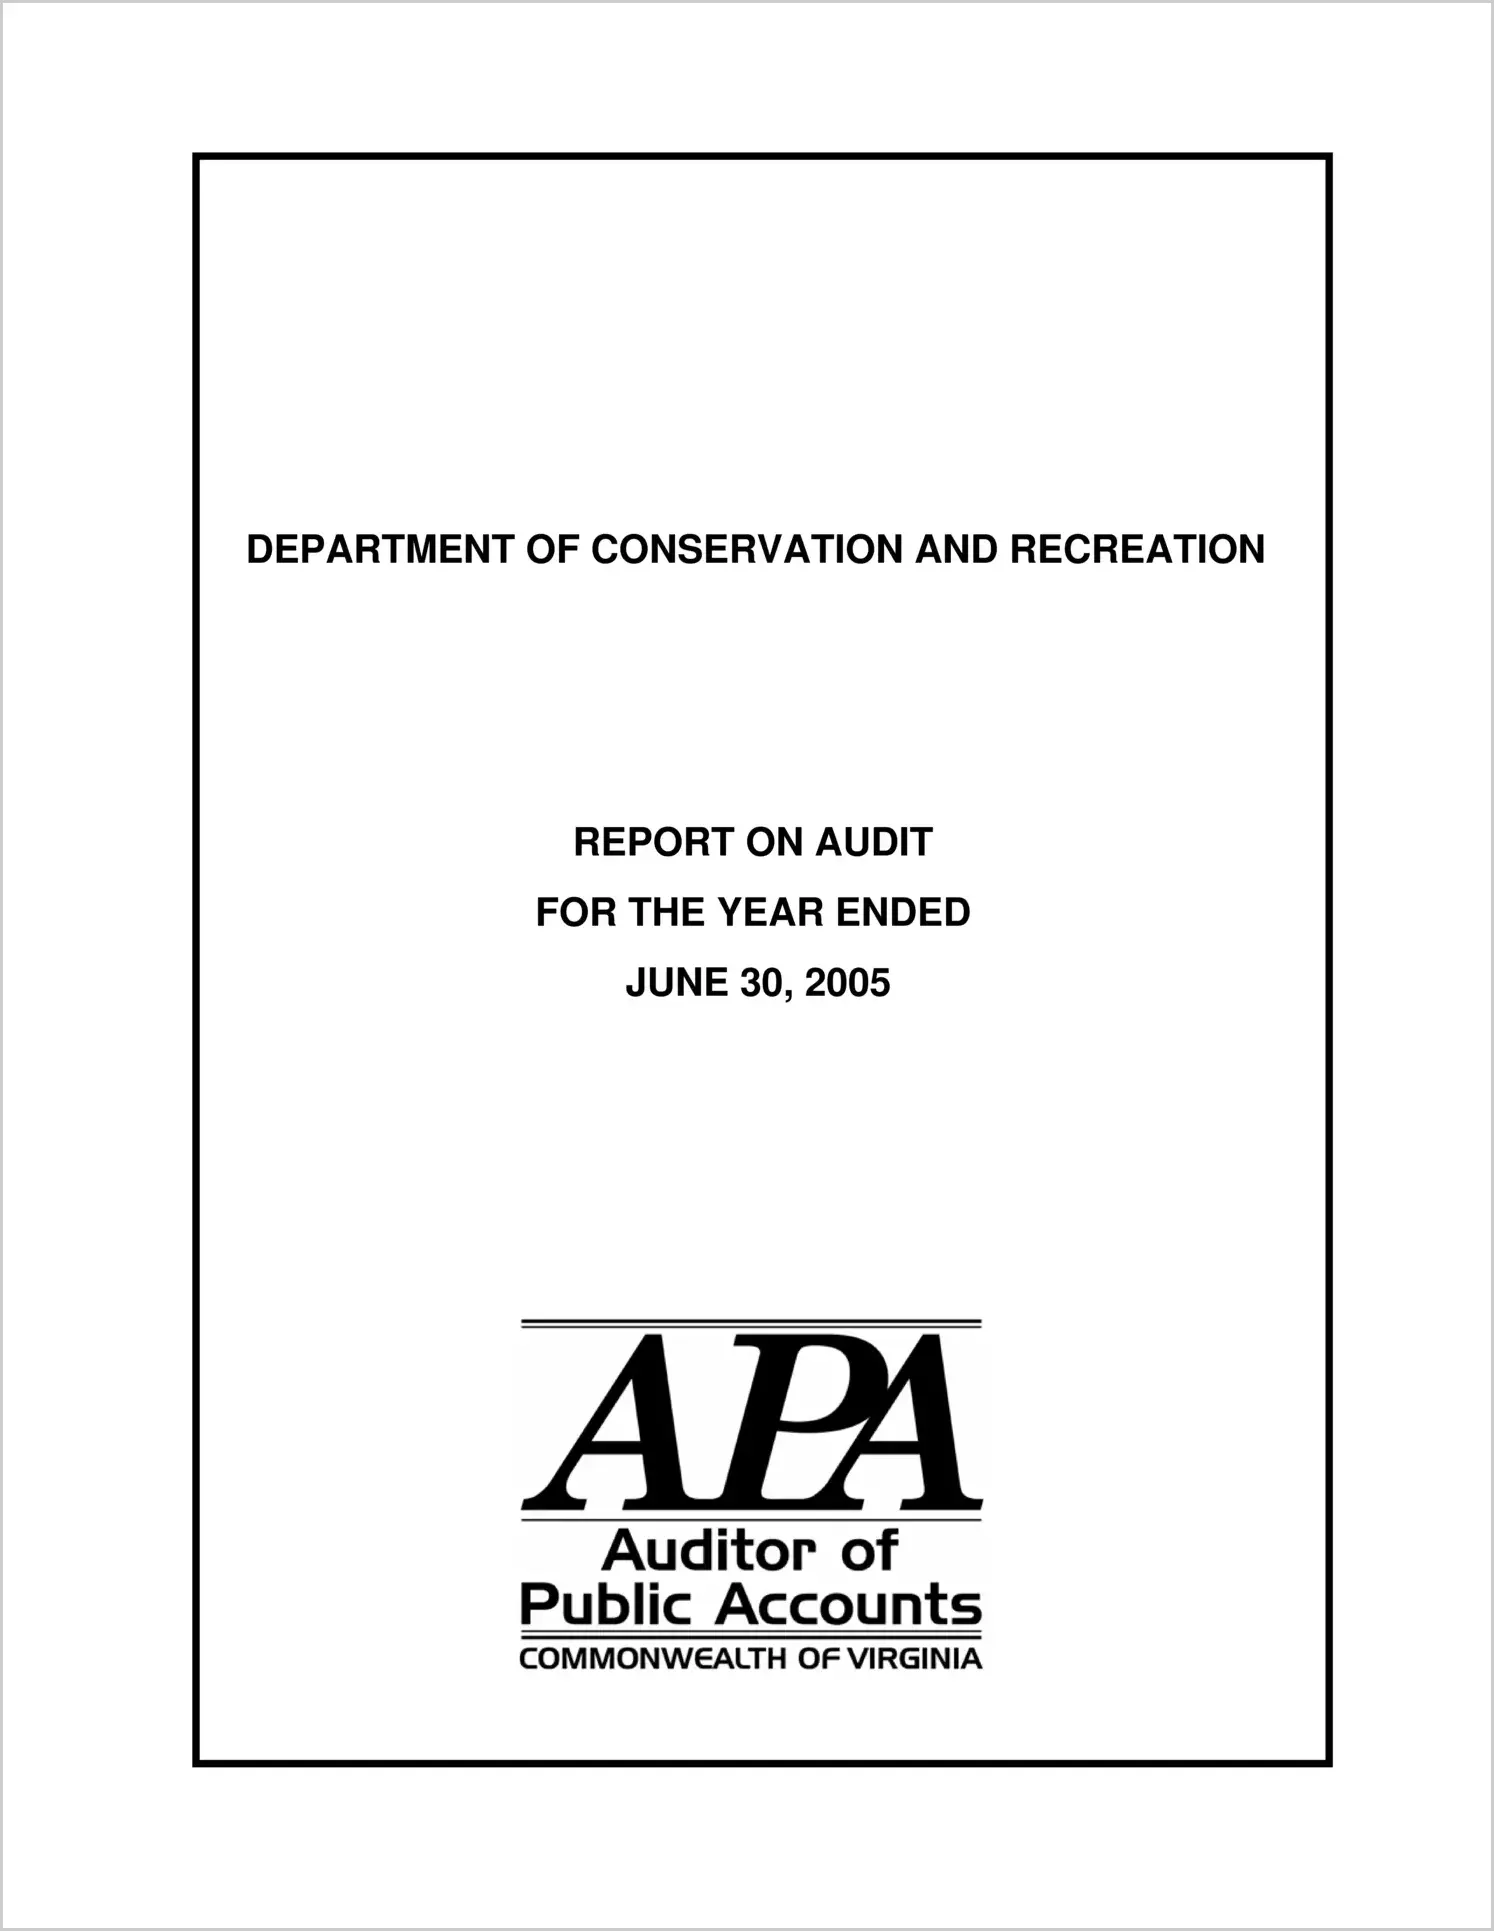 Department of Conservation and Recreation for the year ended June 30, 2005